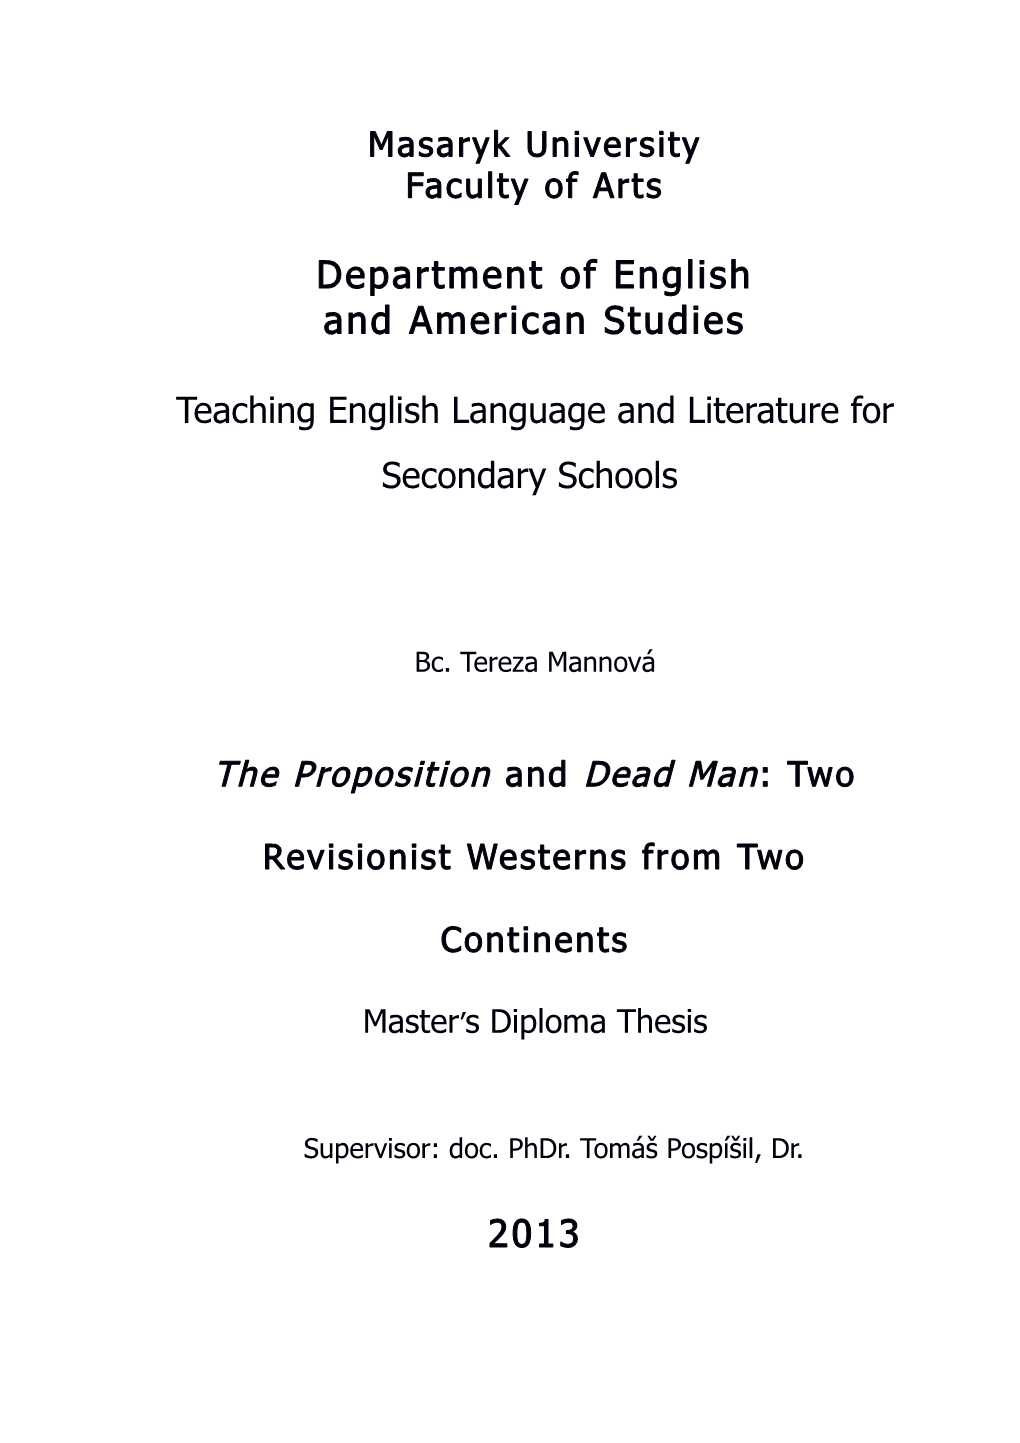 Department of English and American Studies 2013